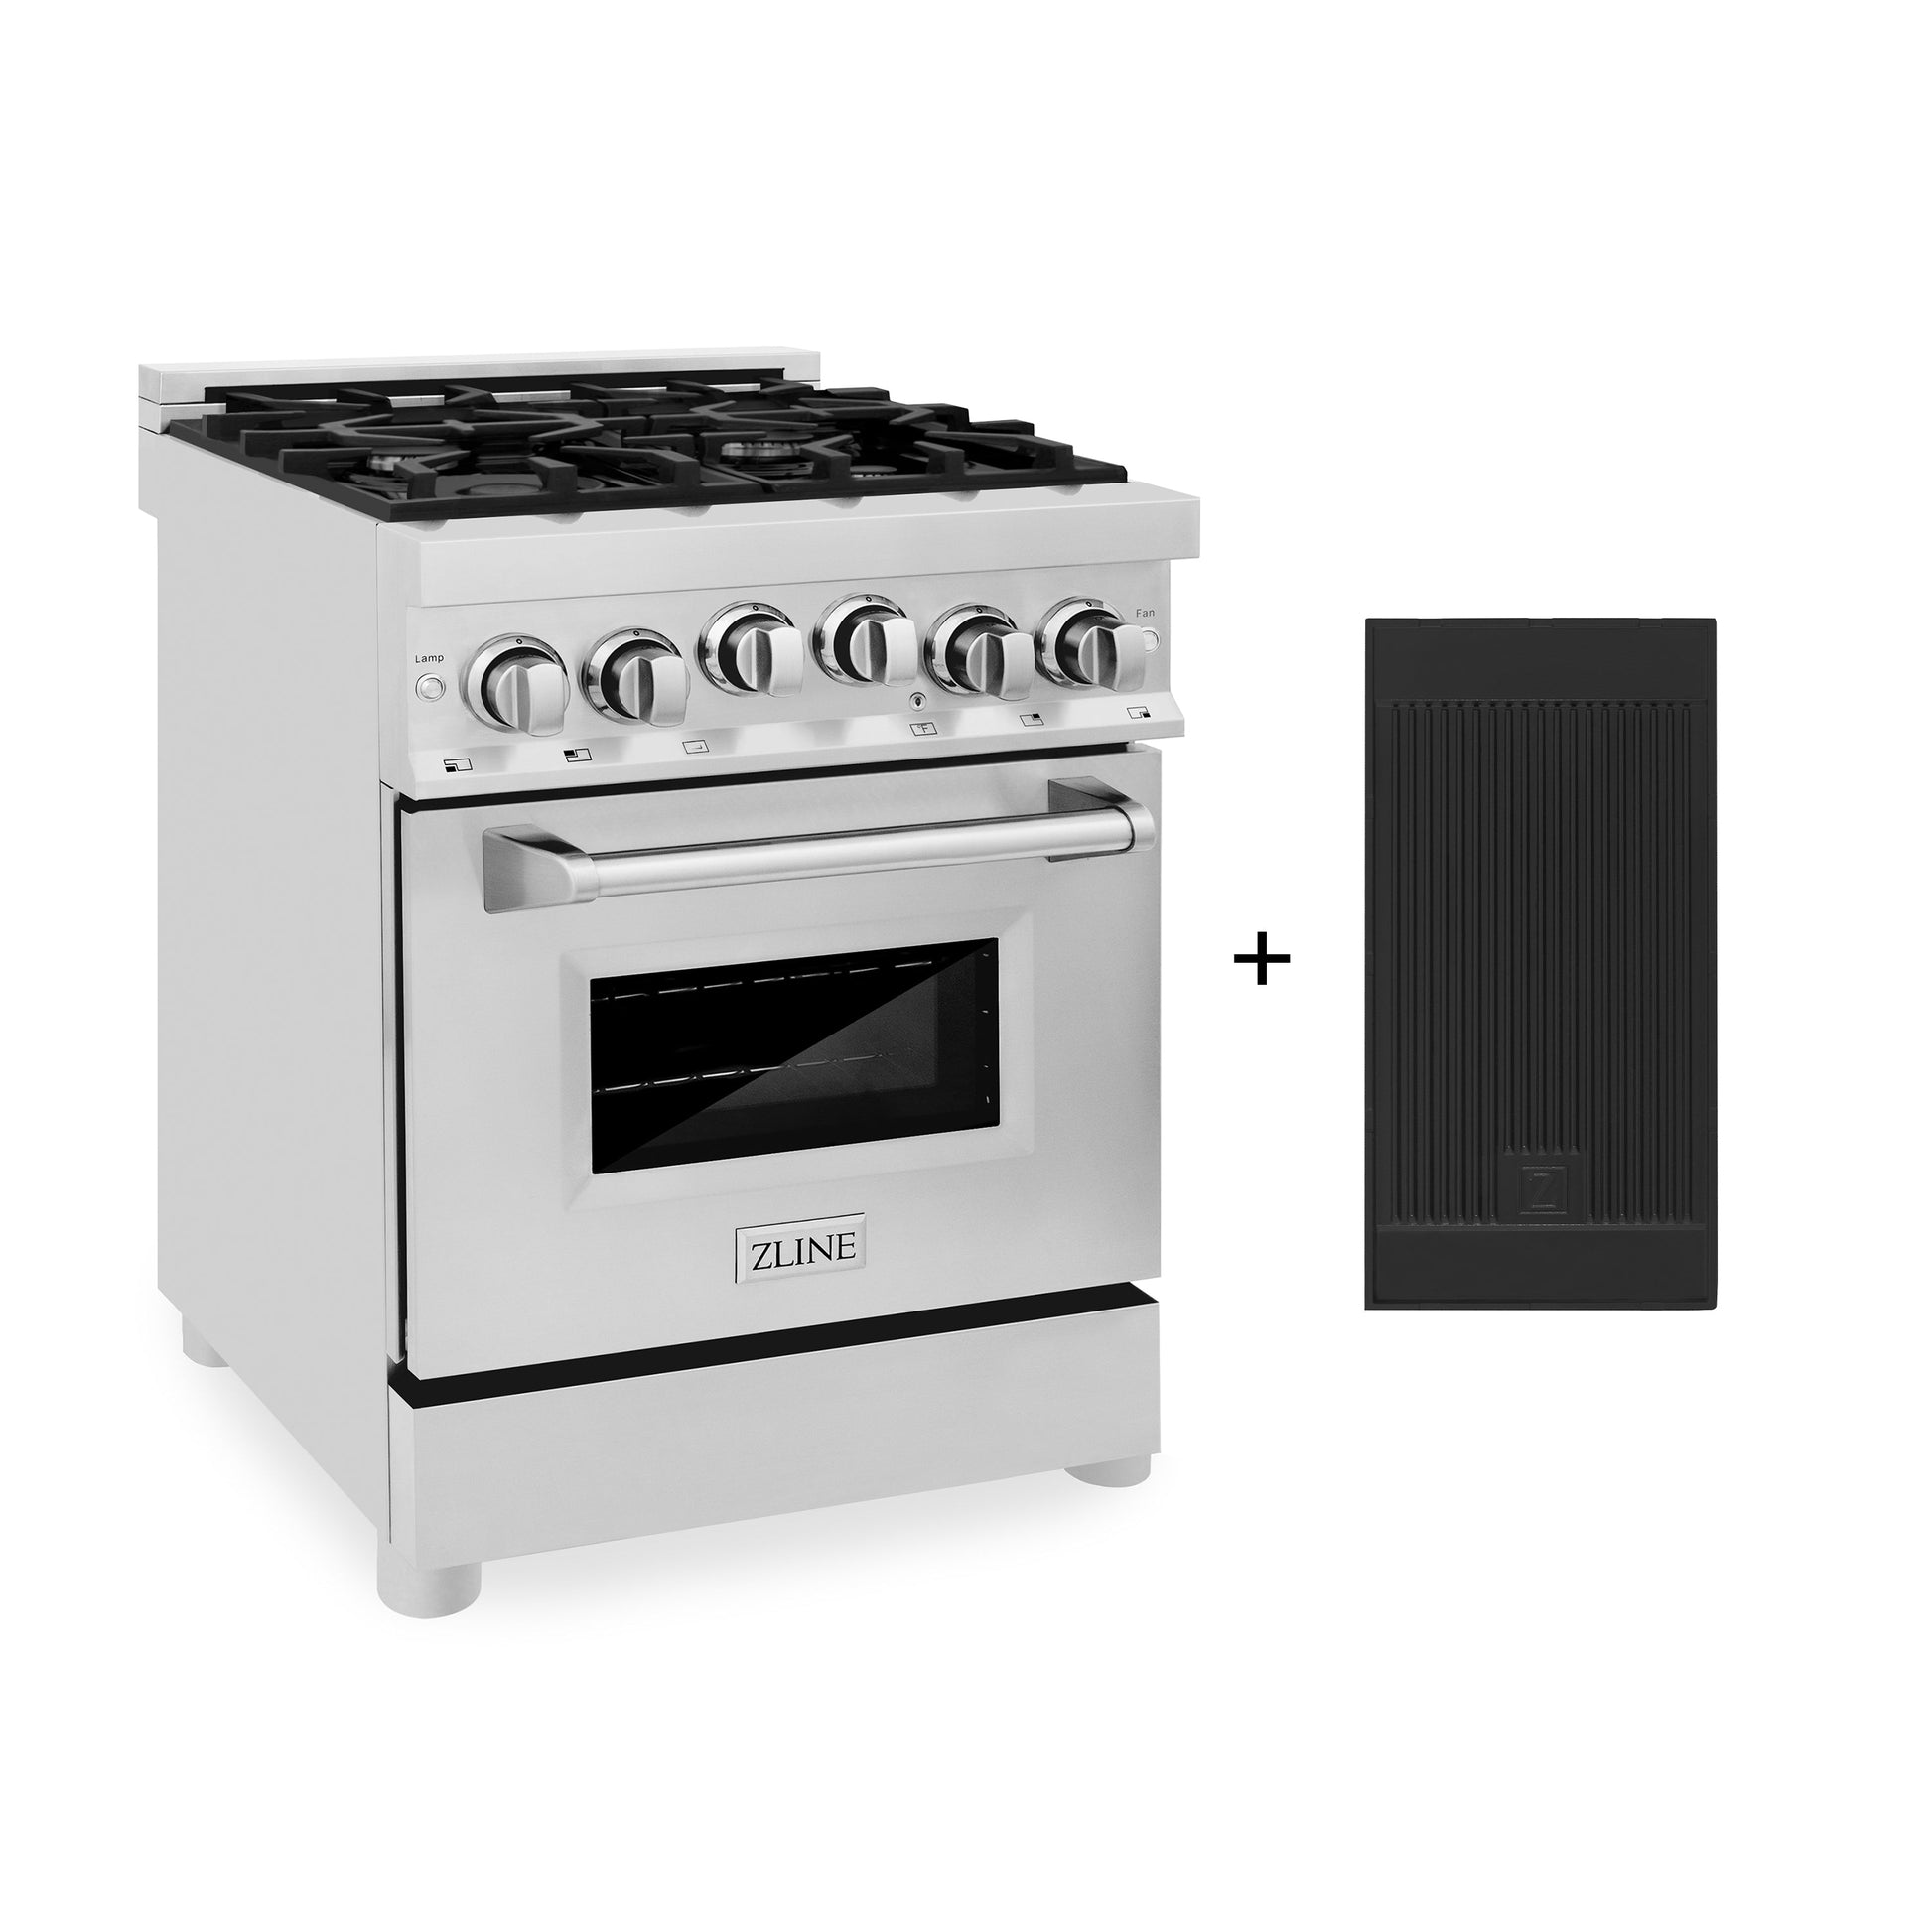 ZLINE 24" Gas Oven and Cooktop Range with Griddle - Stainless Steel